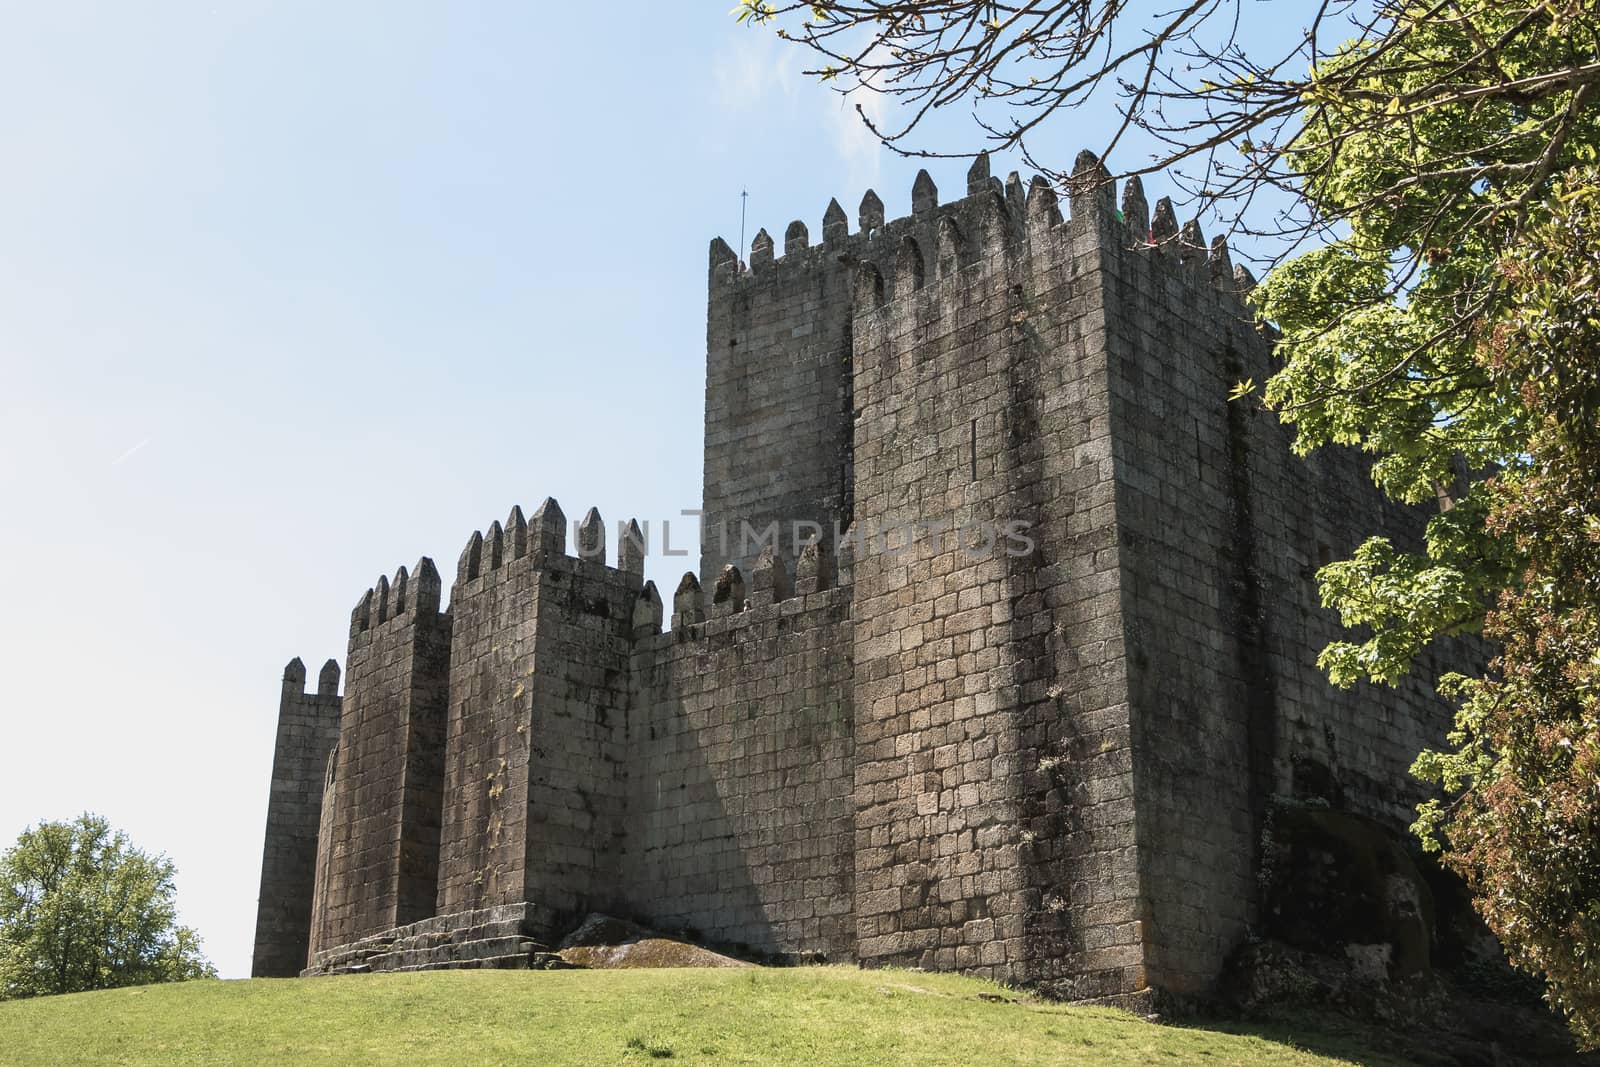 Guimaraes, Portugal - May 10, 2018: Architectural detail of the Guimaraes Castle that tourists visit on a spring day. Medieval castle inhabited by the King of Portugal Alphonse I